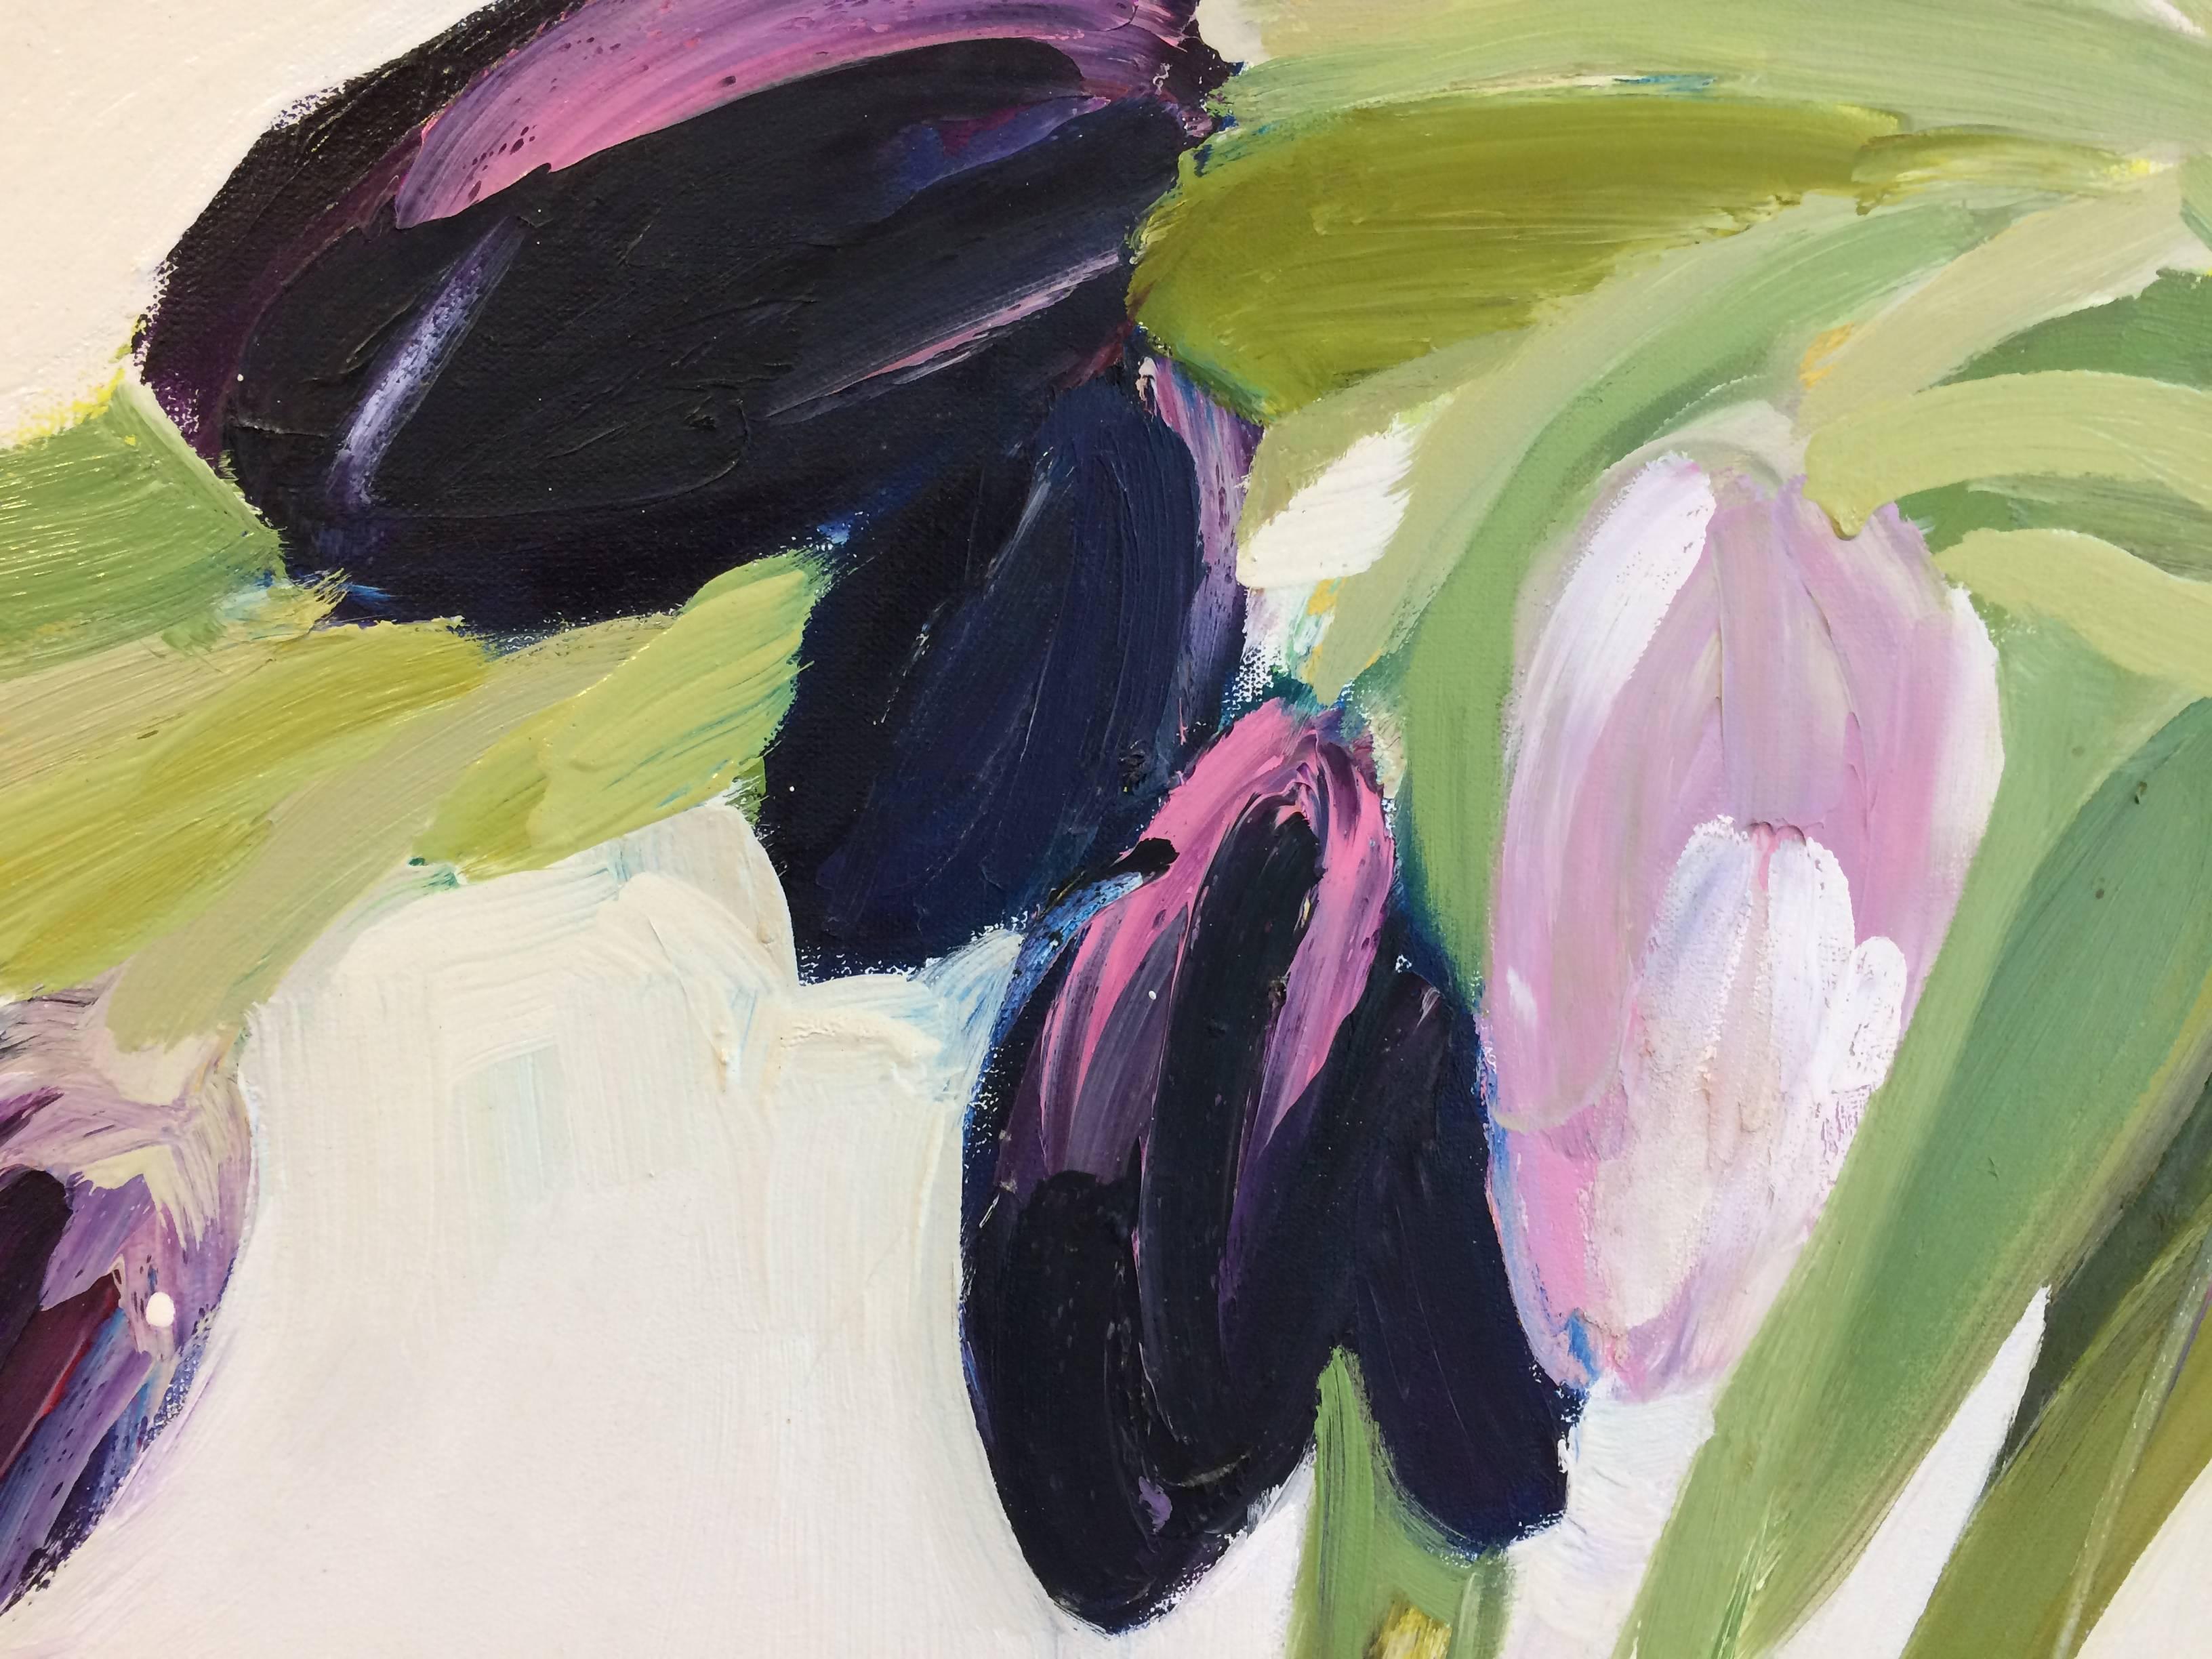 Tulips in a Gray Vase (Horizontal) - Painting by Melora Griffis